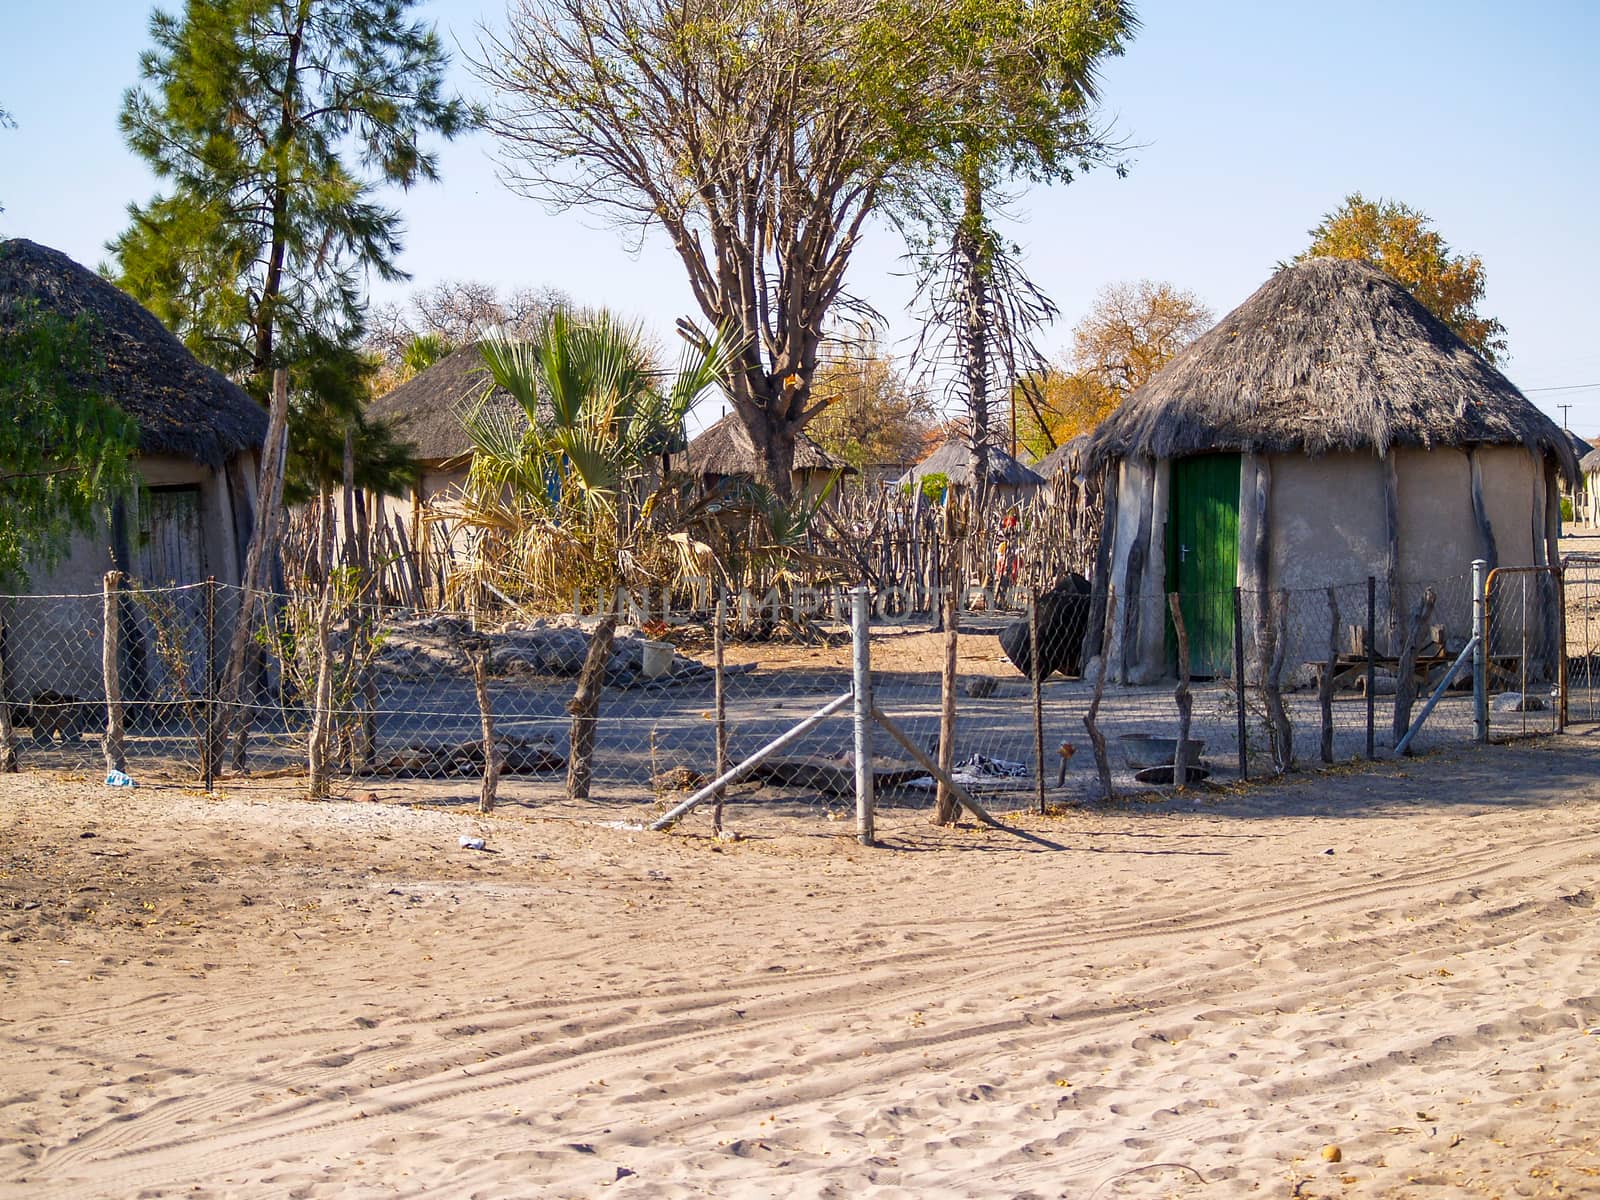 Small African village compound by dusty road, homes and people of Gweta Botswana